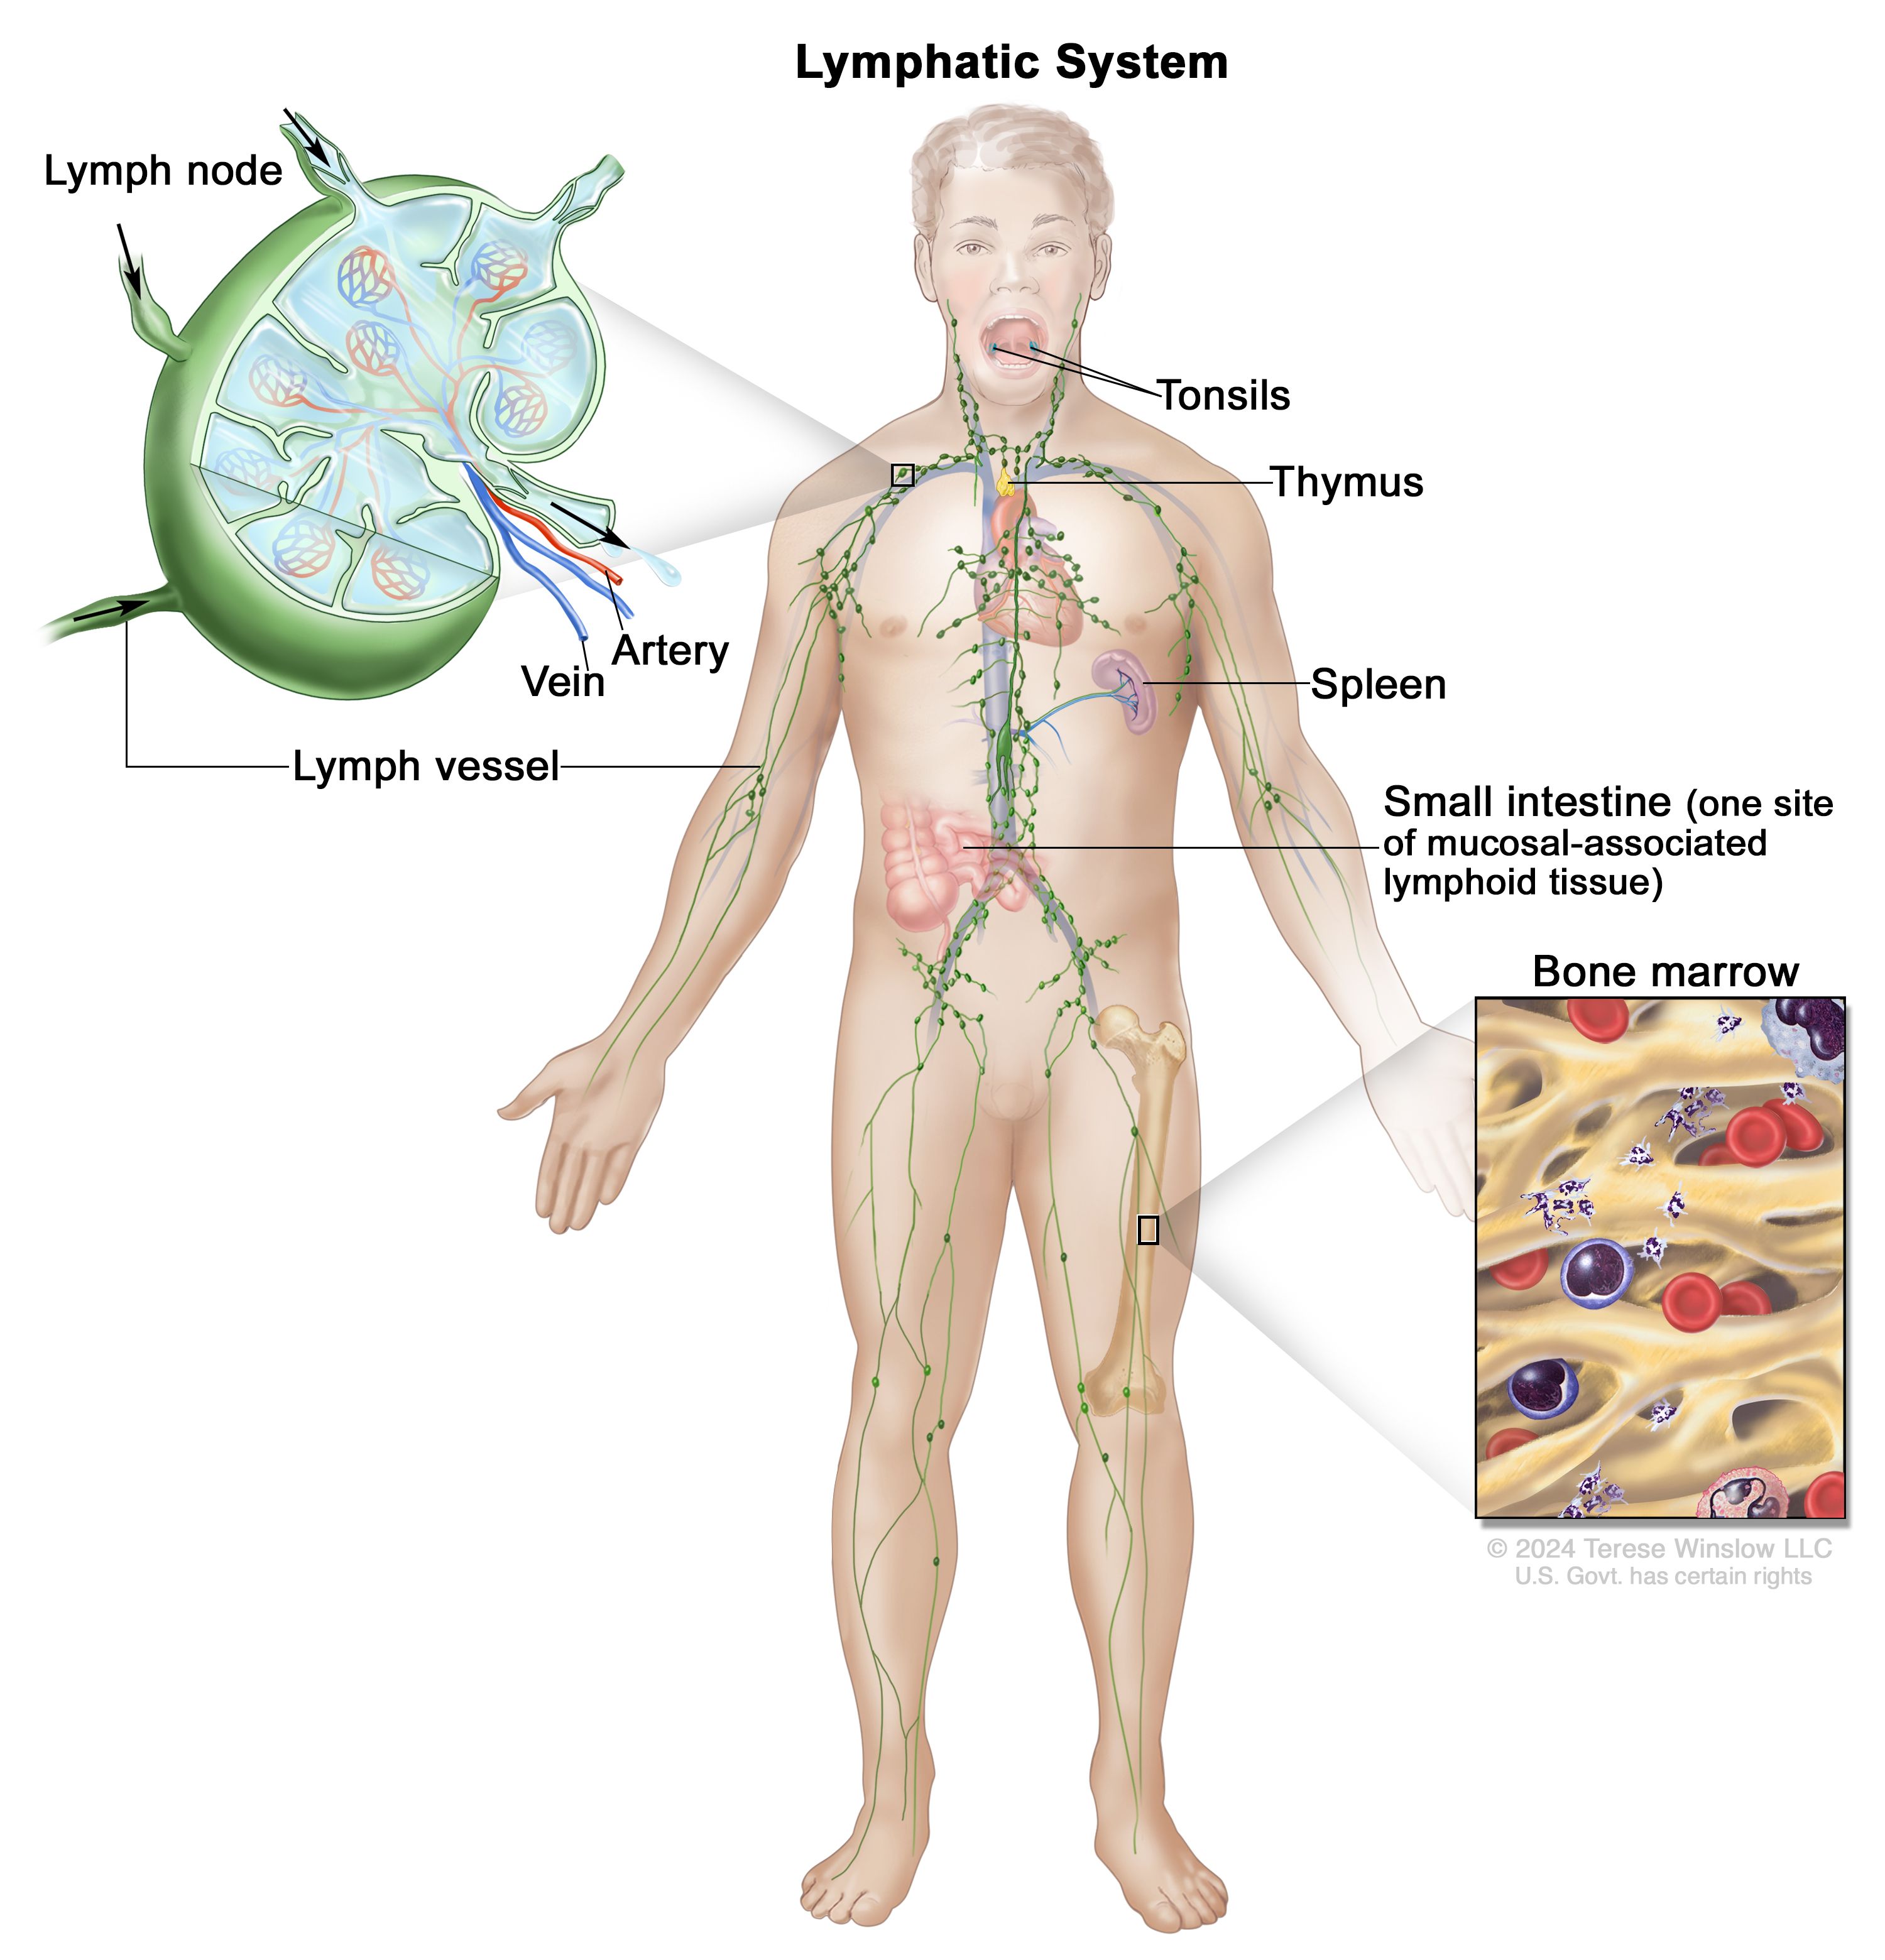 Definition of lymphatic system - NCI Dictionary of Cancer Terms - NCI